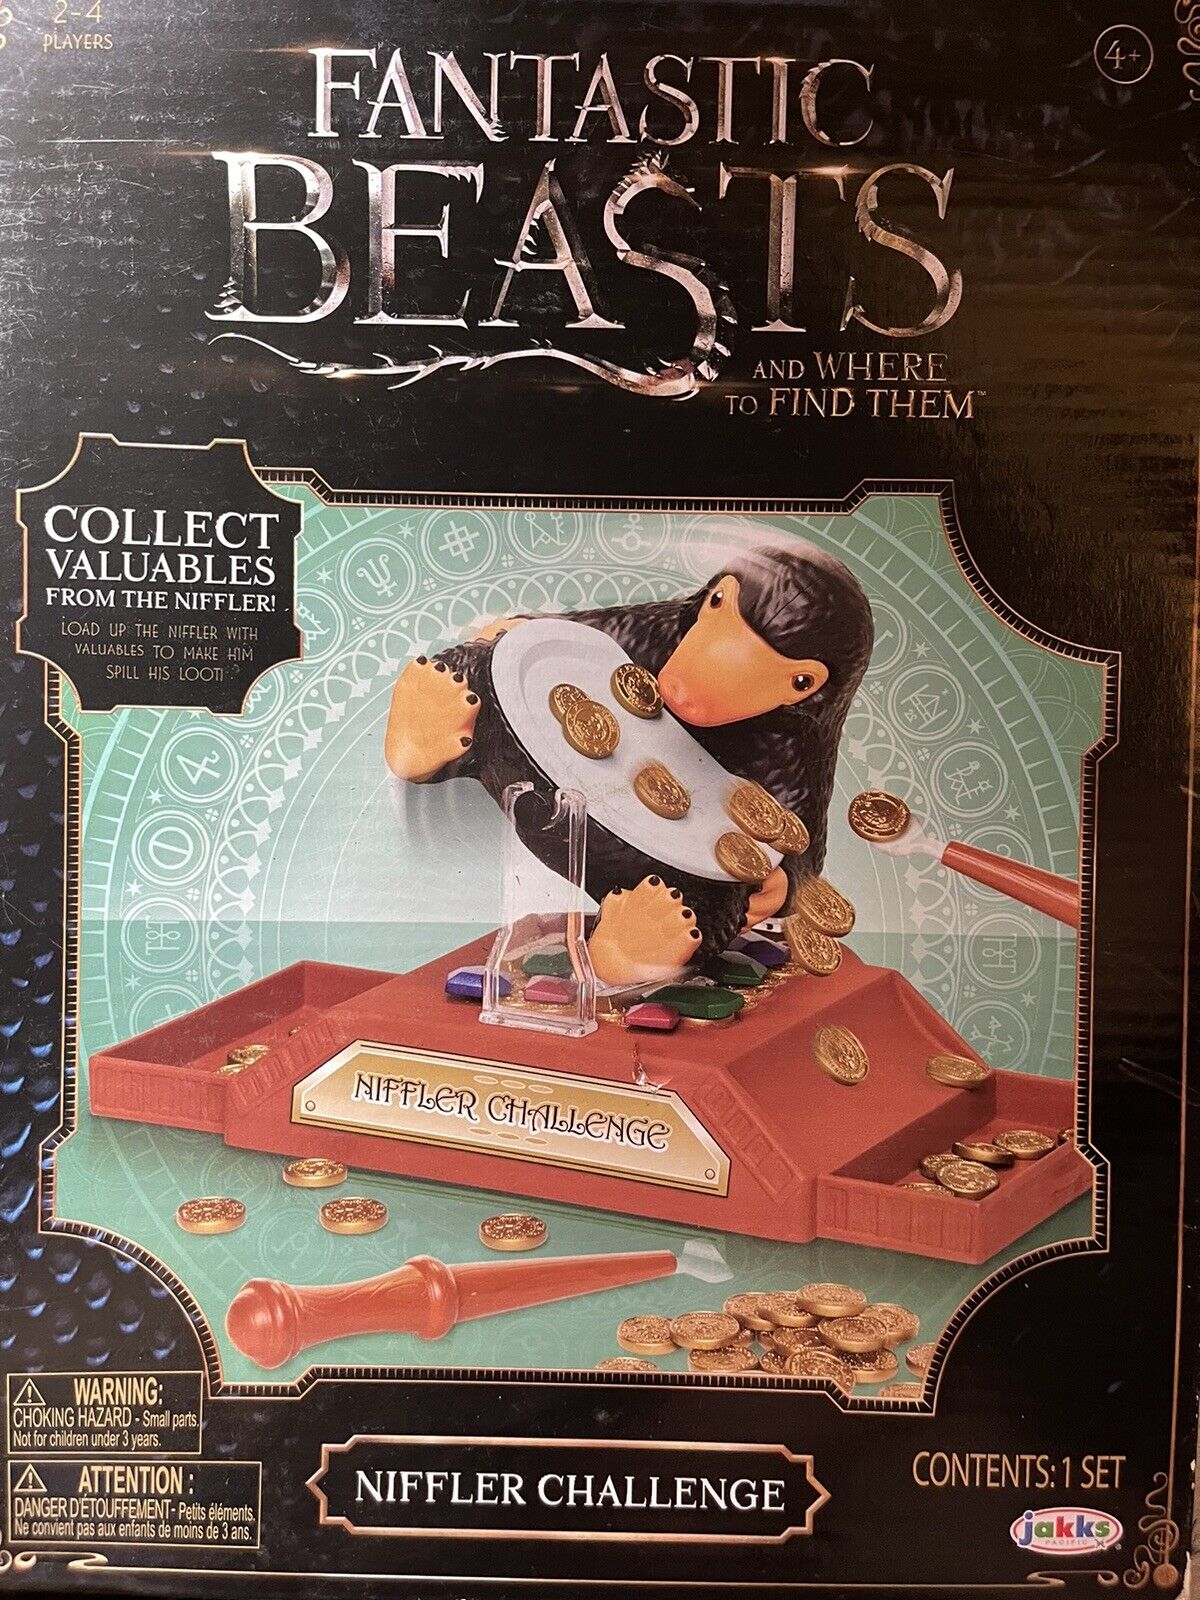 NEW Fantastic Beasts And Where To Find Them Niffler Challenge Game Offers Welcom